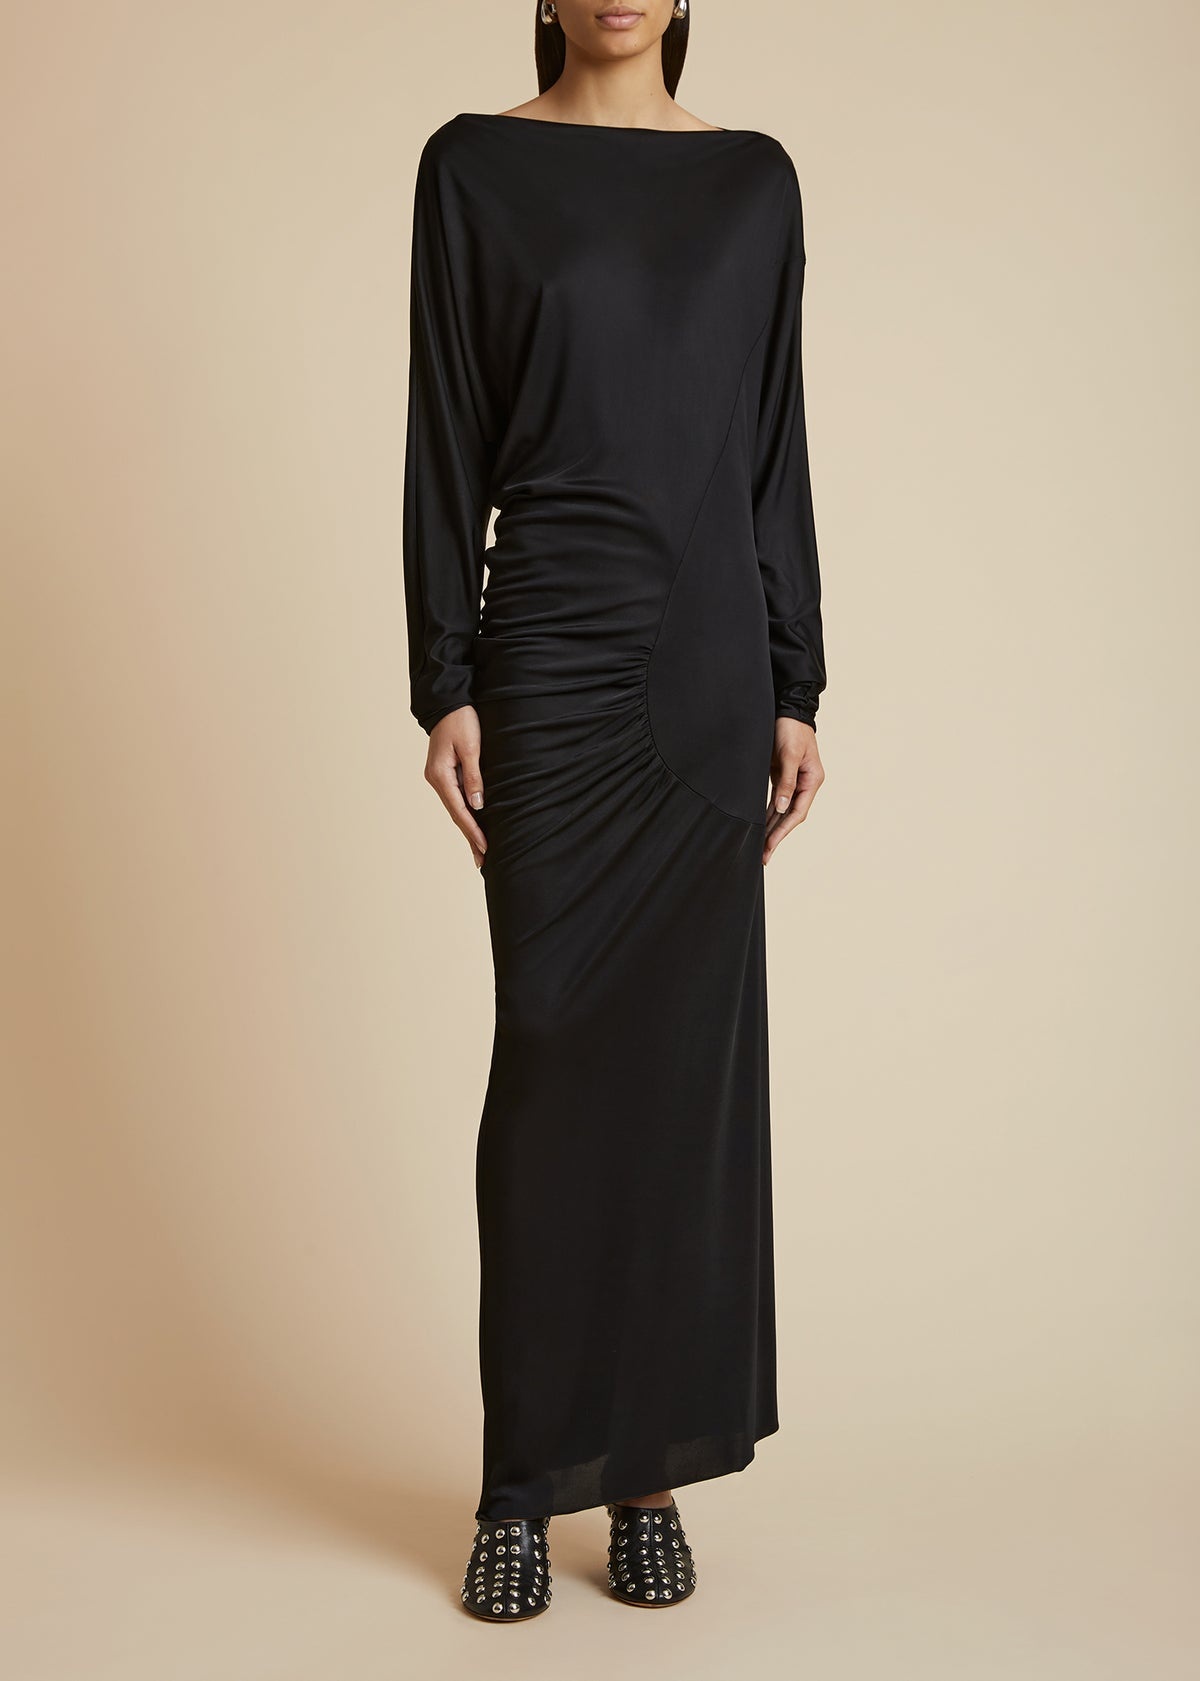 The Oron Dress in Black - 1